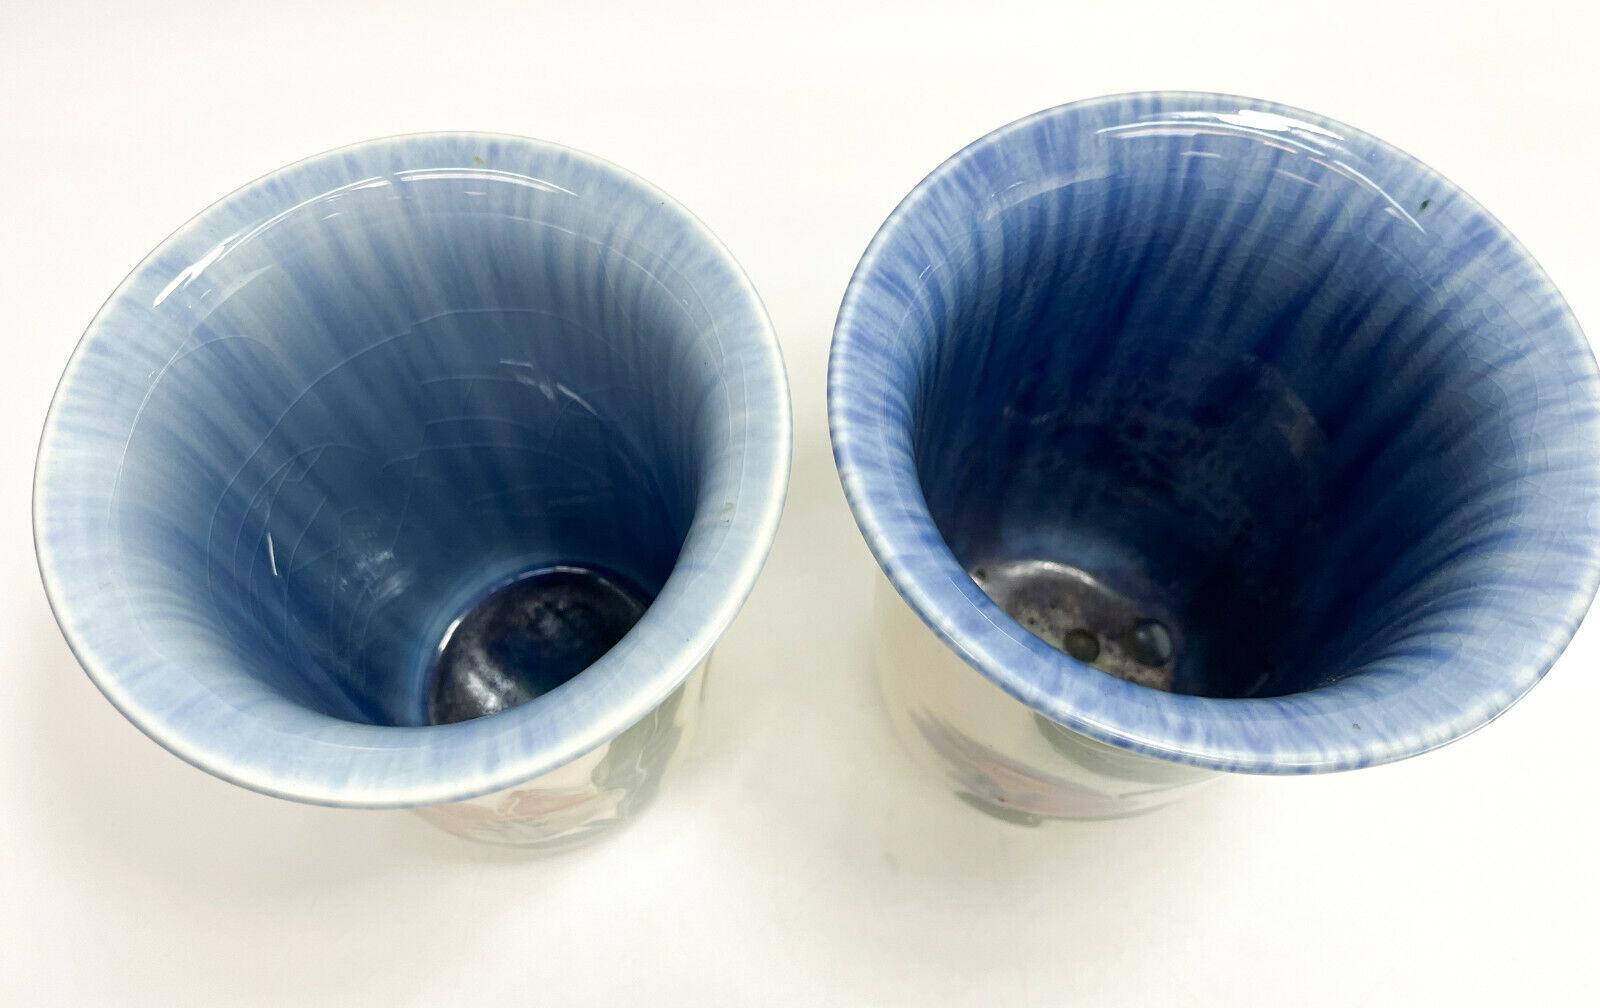 Glass Pair of Rookwood Pottery Vases by E.T. Hurley #6806, Hand Painted Tulips, 1943 For Sale